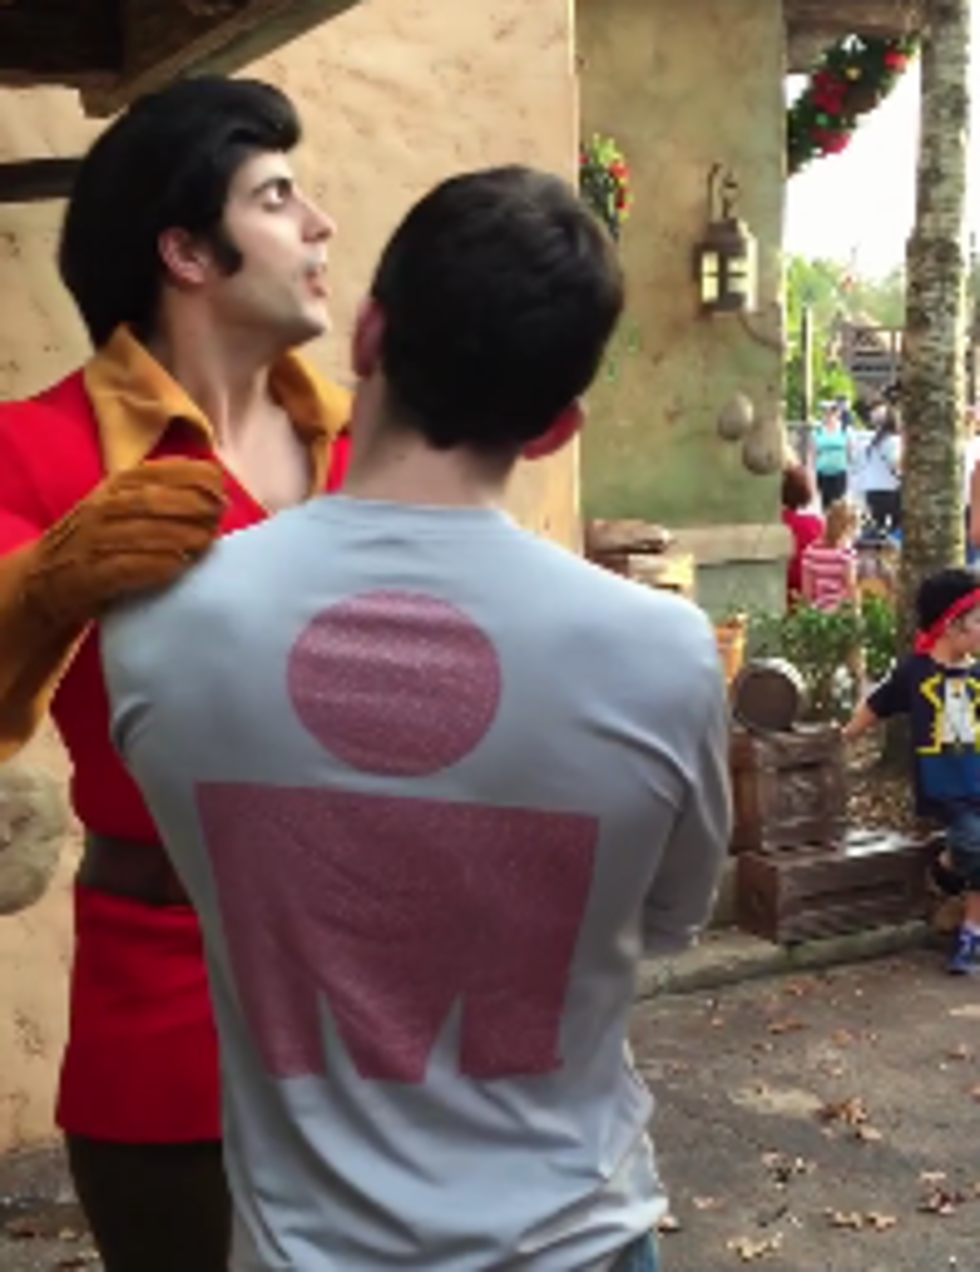 What Happens When You Challenge Gaston To A Push-Up Contest [Video]